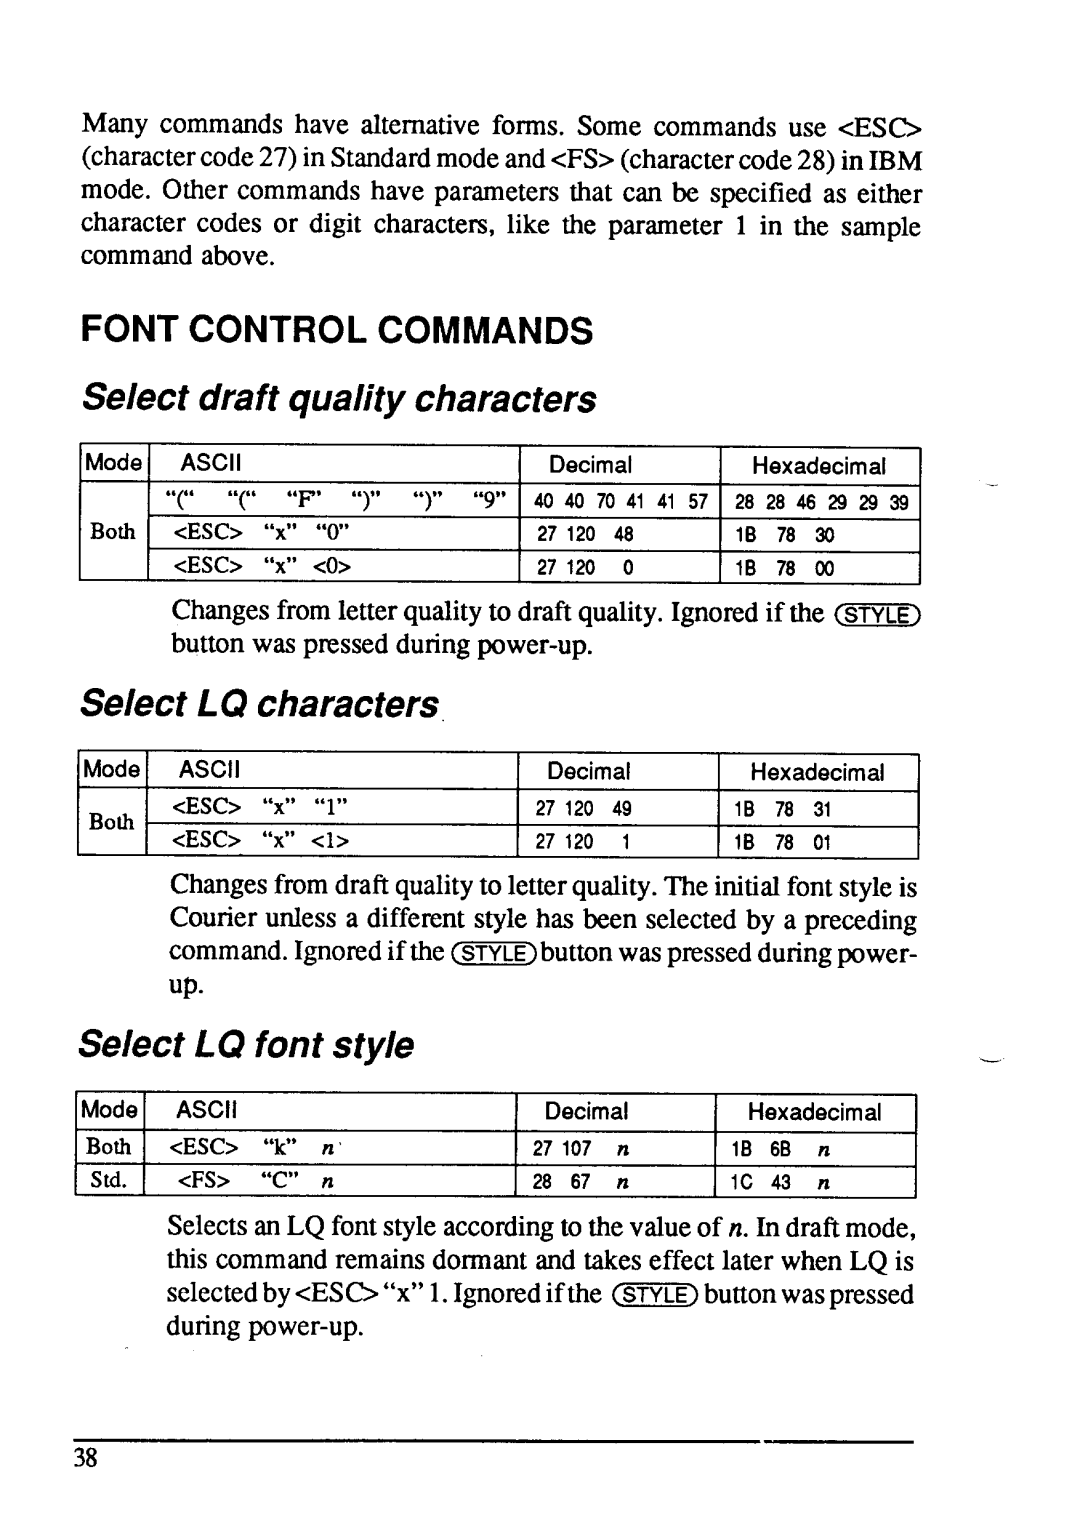 Star Micronics LC24-15 Select draft quality characters, Select LQ characters, Select LQ font style, Font Control Commands 